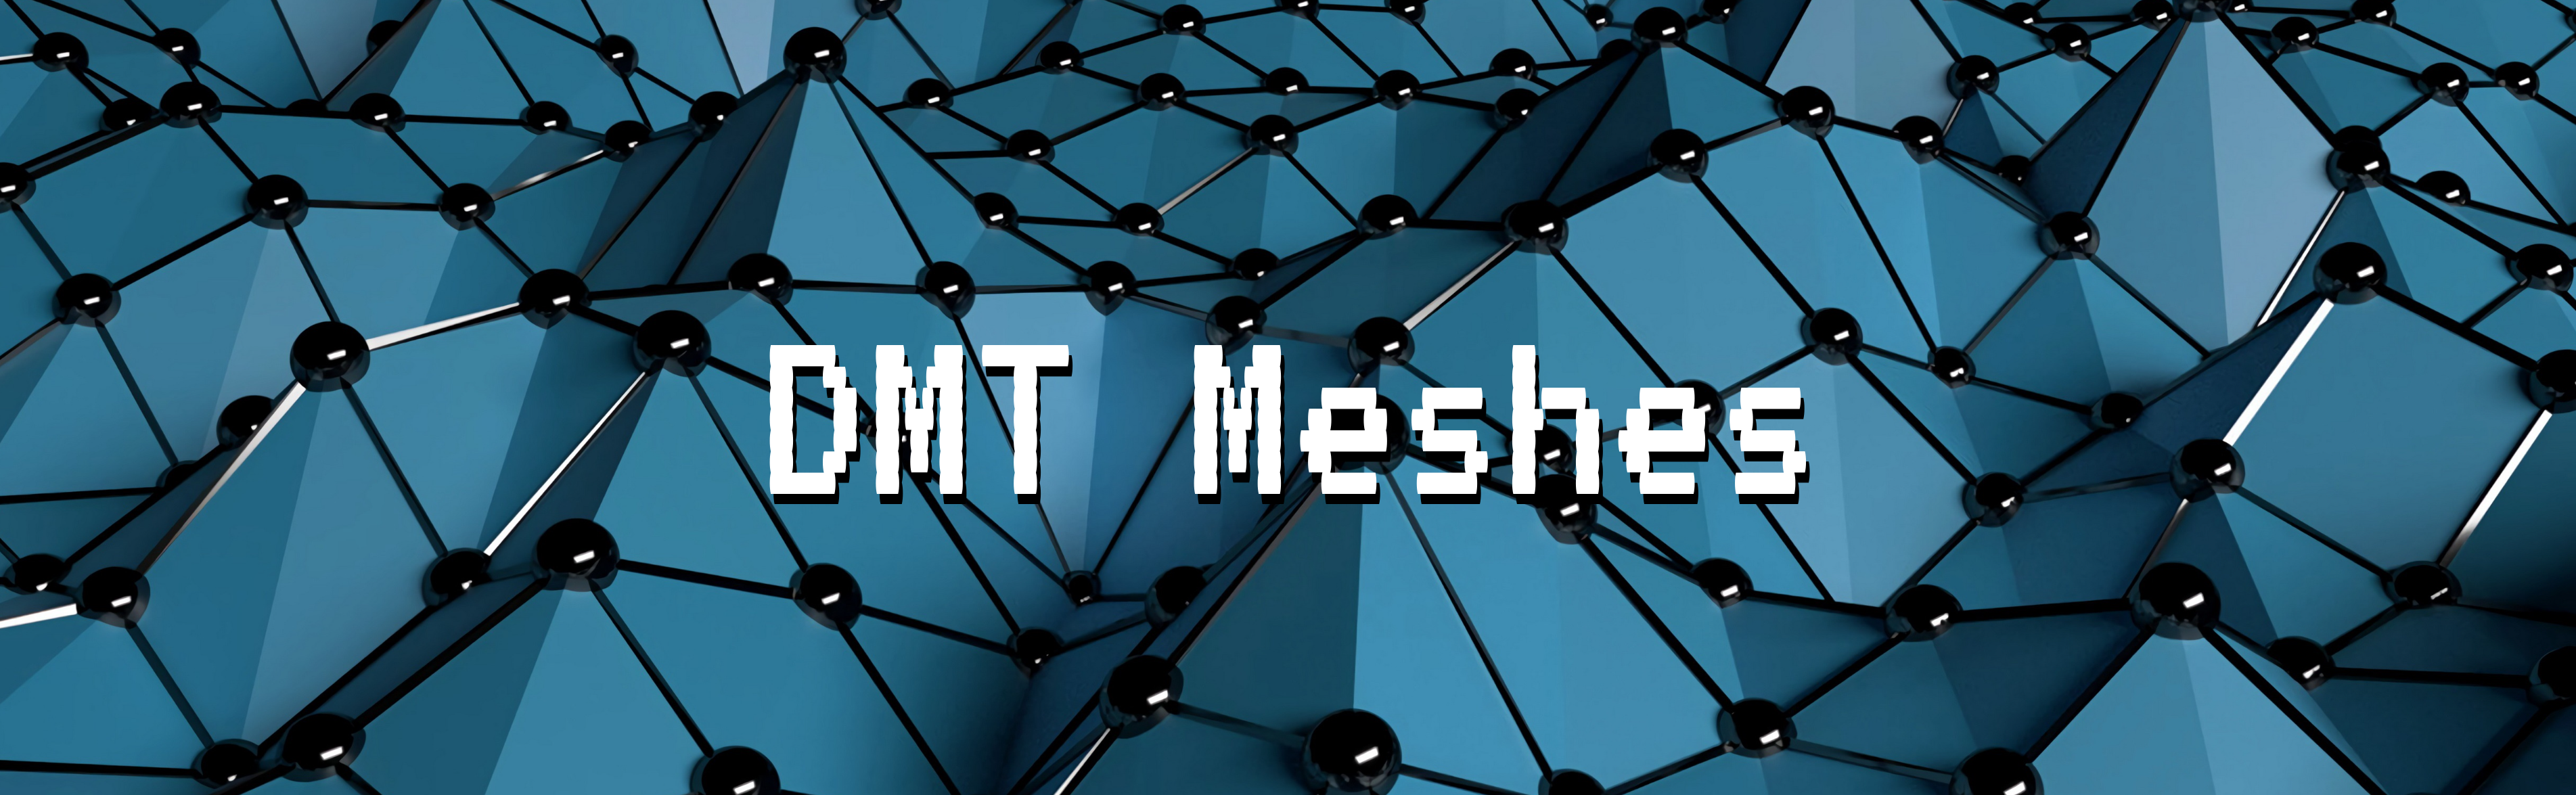 DMT Meshes, subtitle: Generative 3D Meshes built-in to Blender